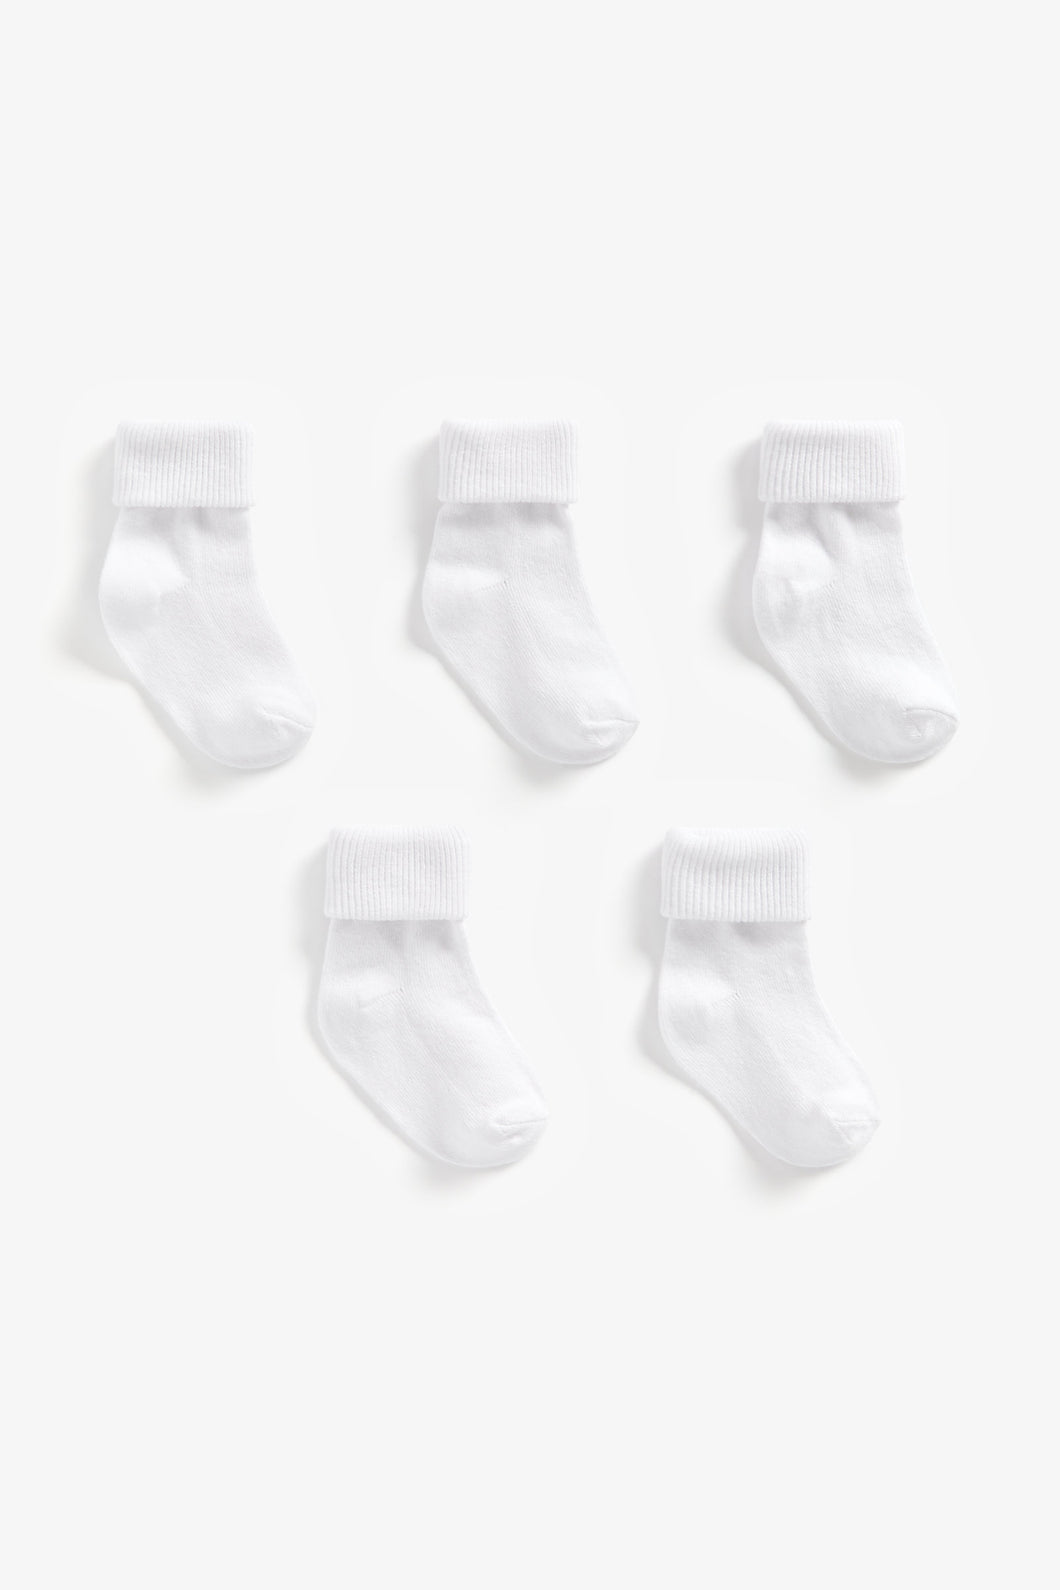 Mothercare White Turn-Over-Top Baby Socks - 5 Pack